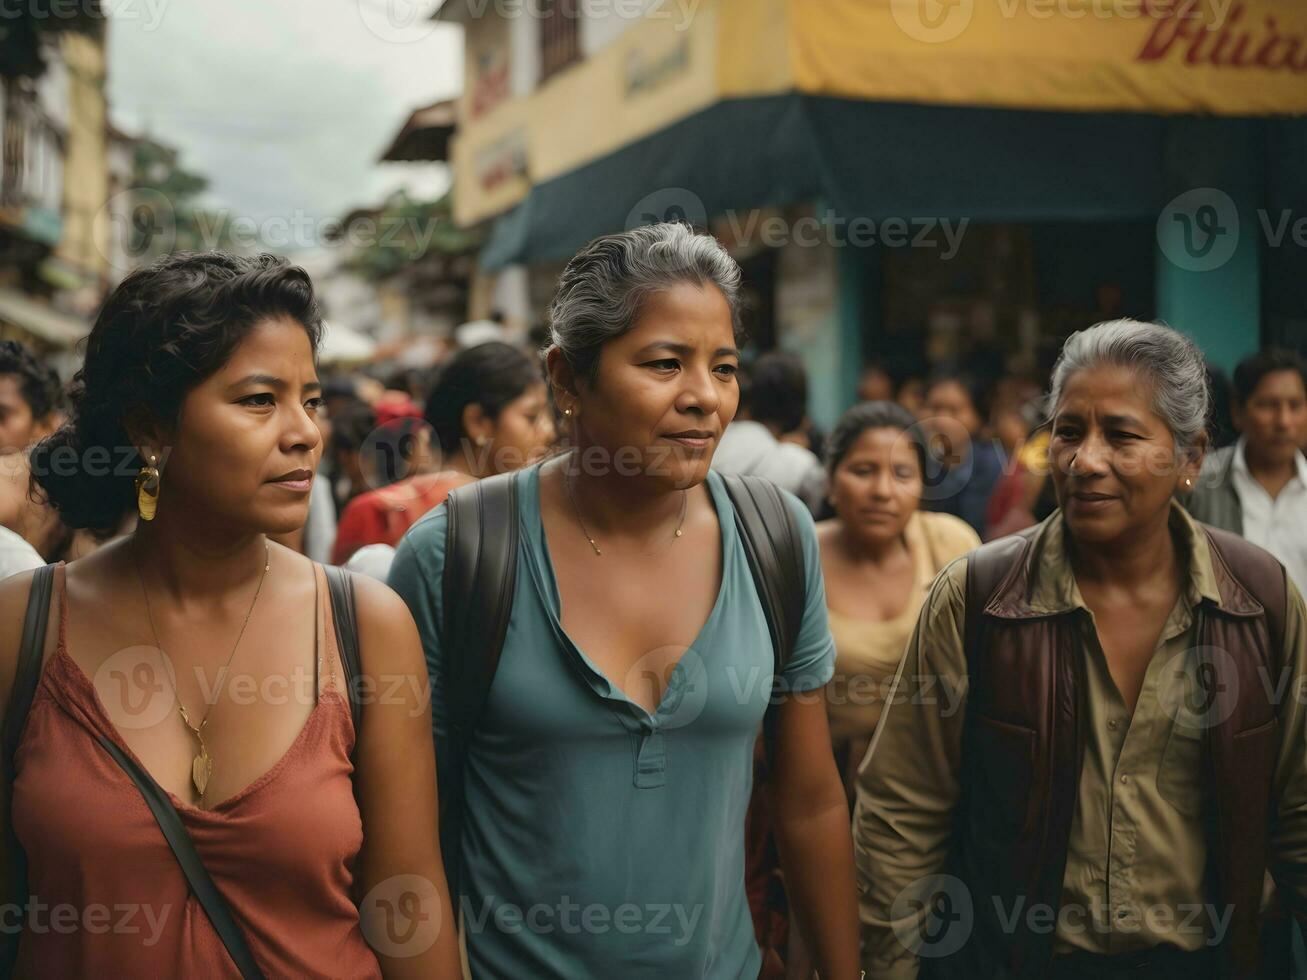 A bustling street corner in Colombia, where people of all ages and backgrounds come together to share their digital lifestyle photo